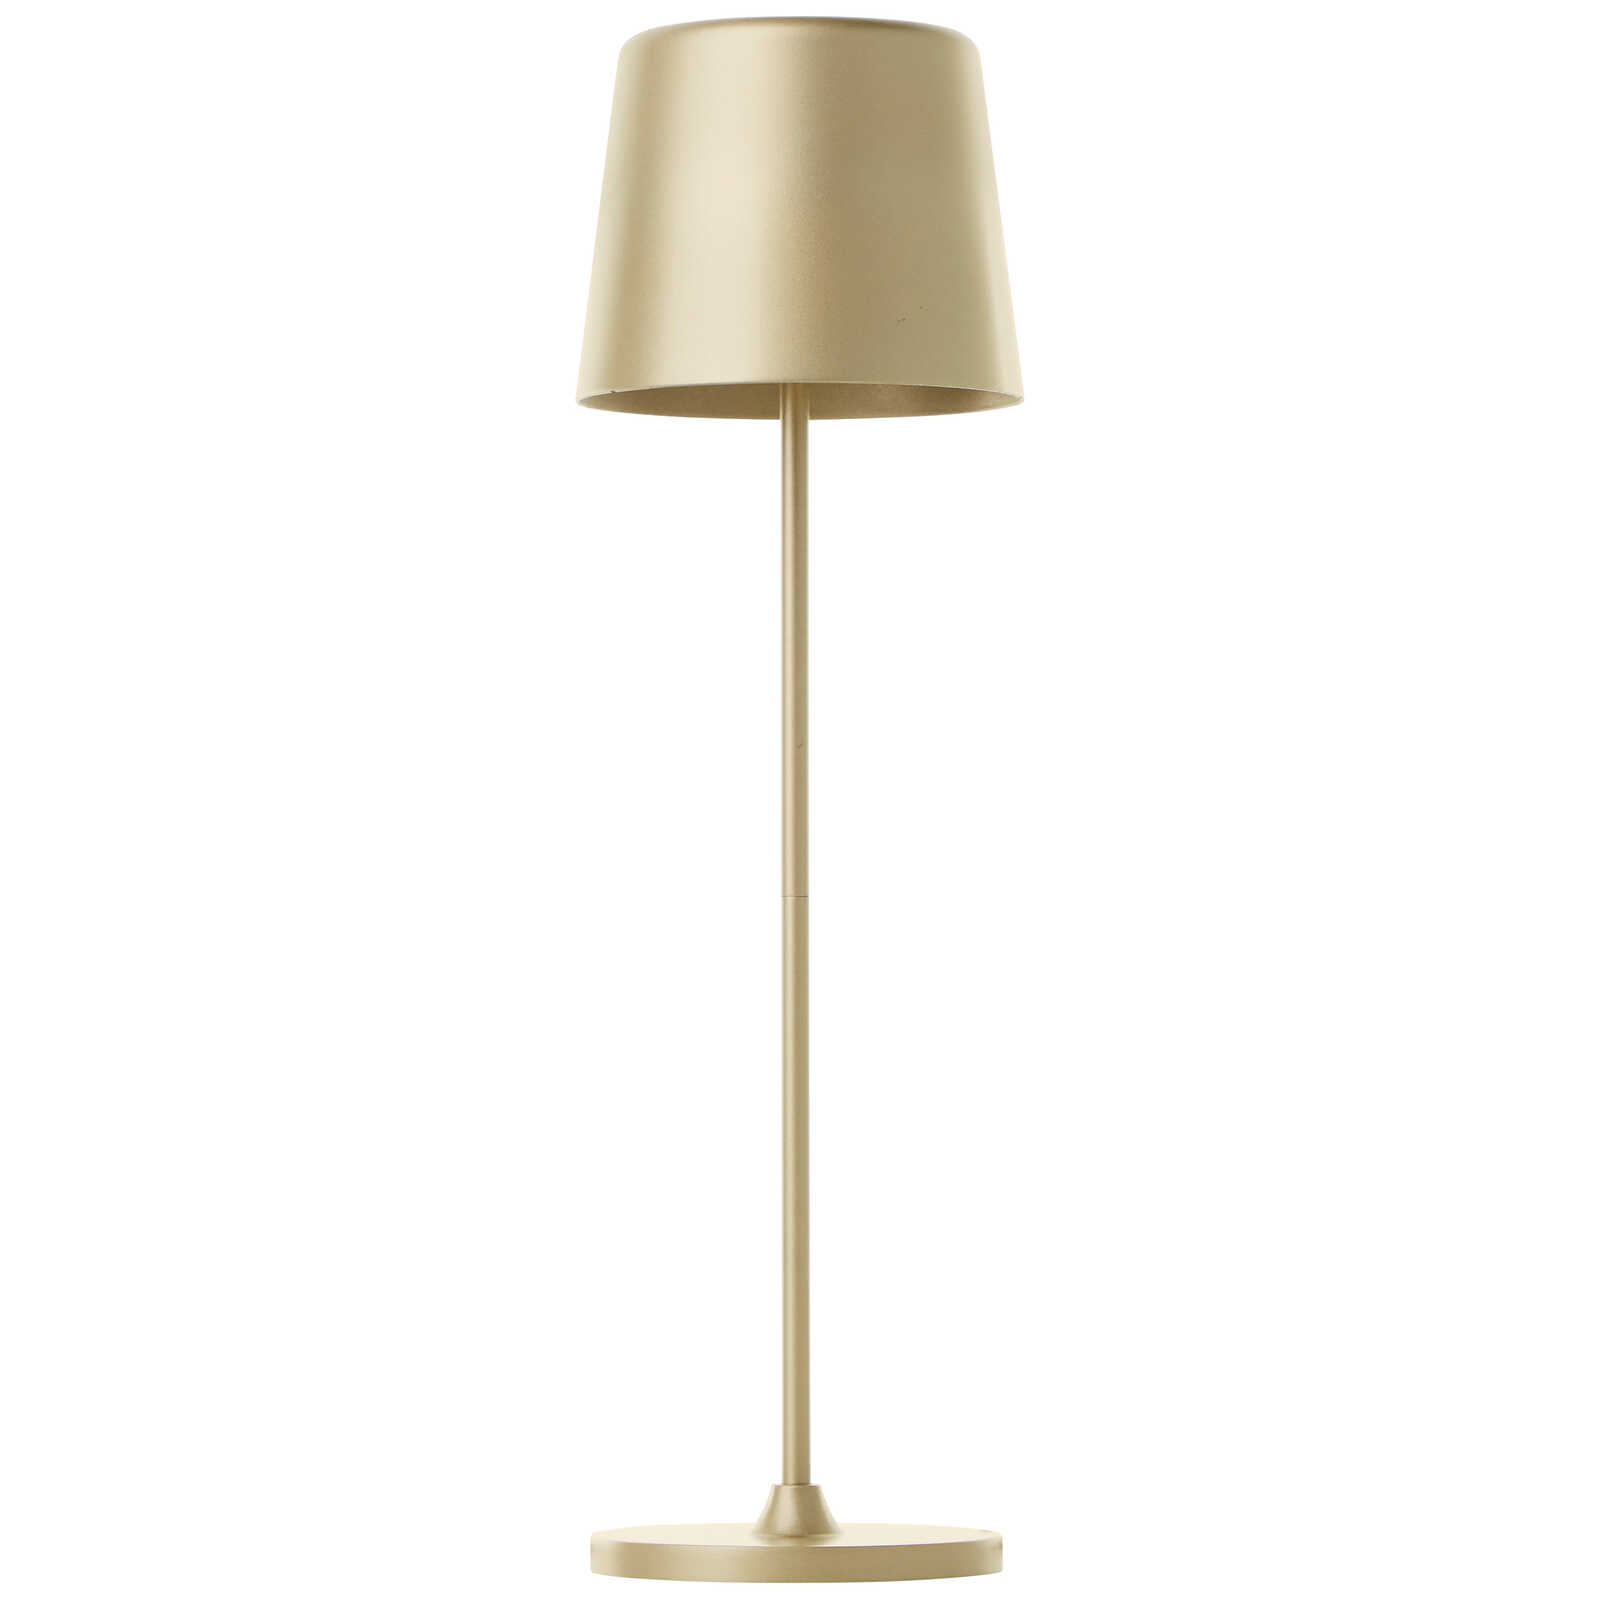             Metal table lamp - Cosy 2 - Gold
        